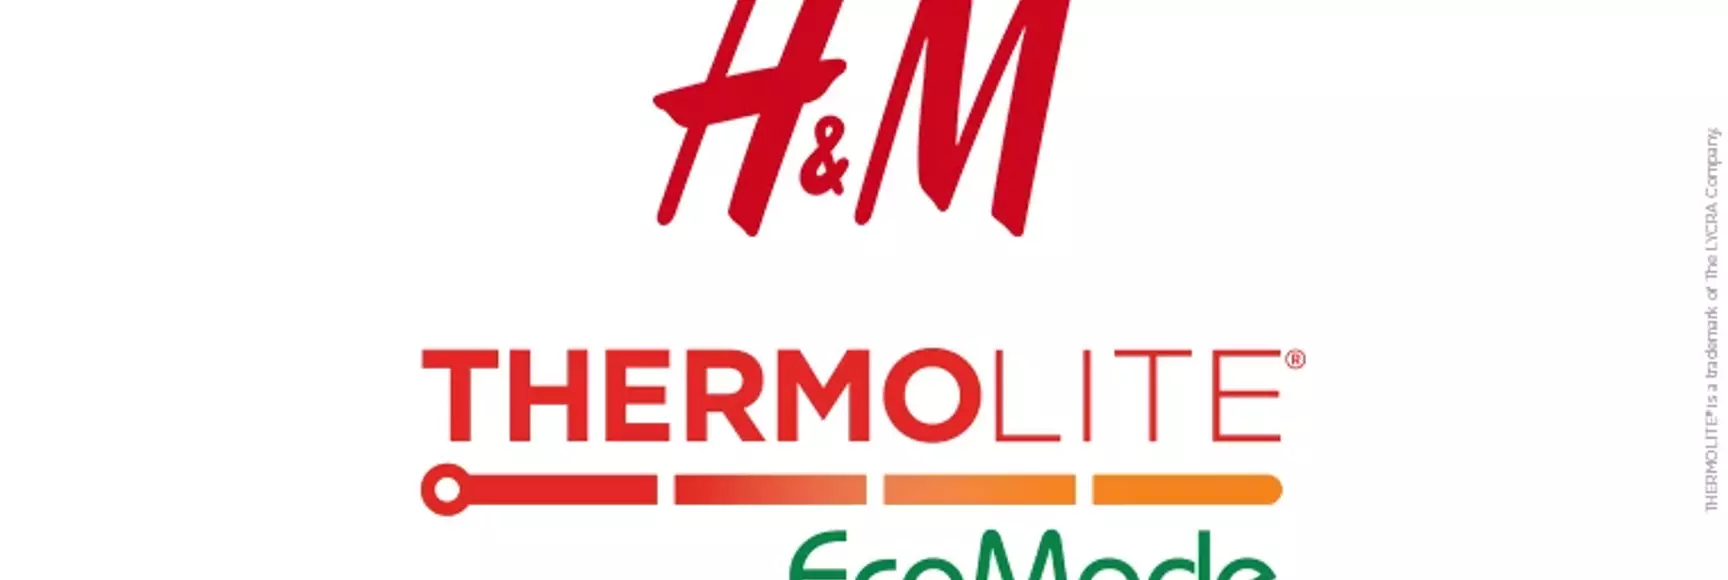 Logos for H&M and THERMOLITE® T-DOWN EcoMade insulation, which is used in a new line of men’s and women’s winter jackets.